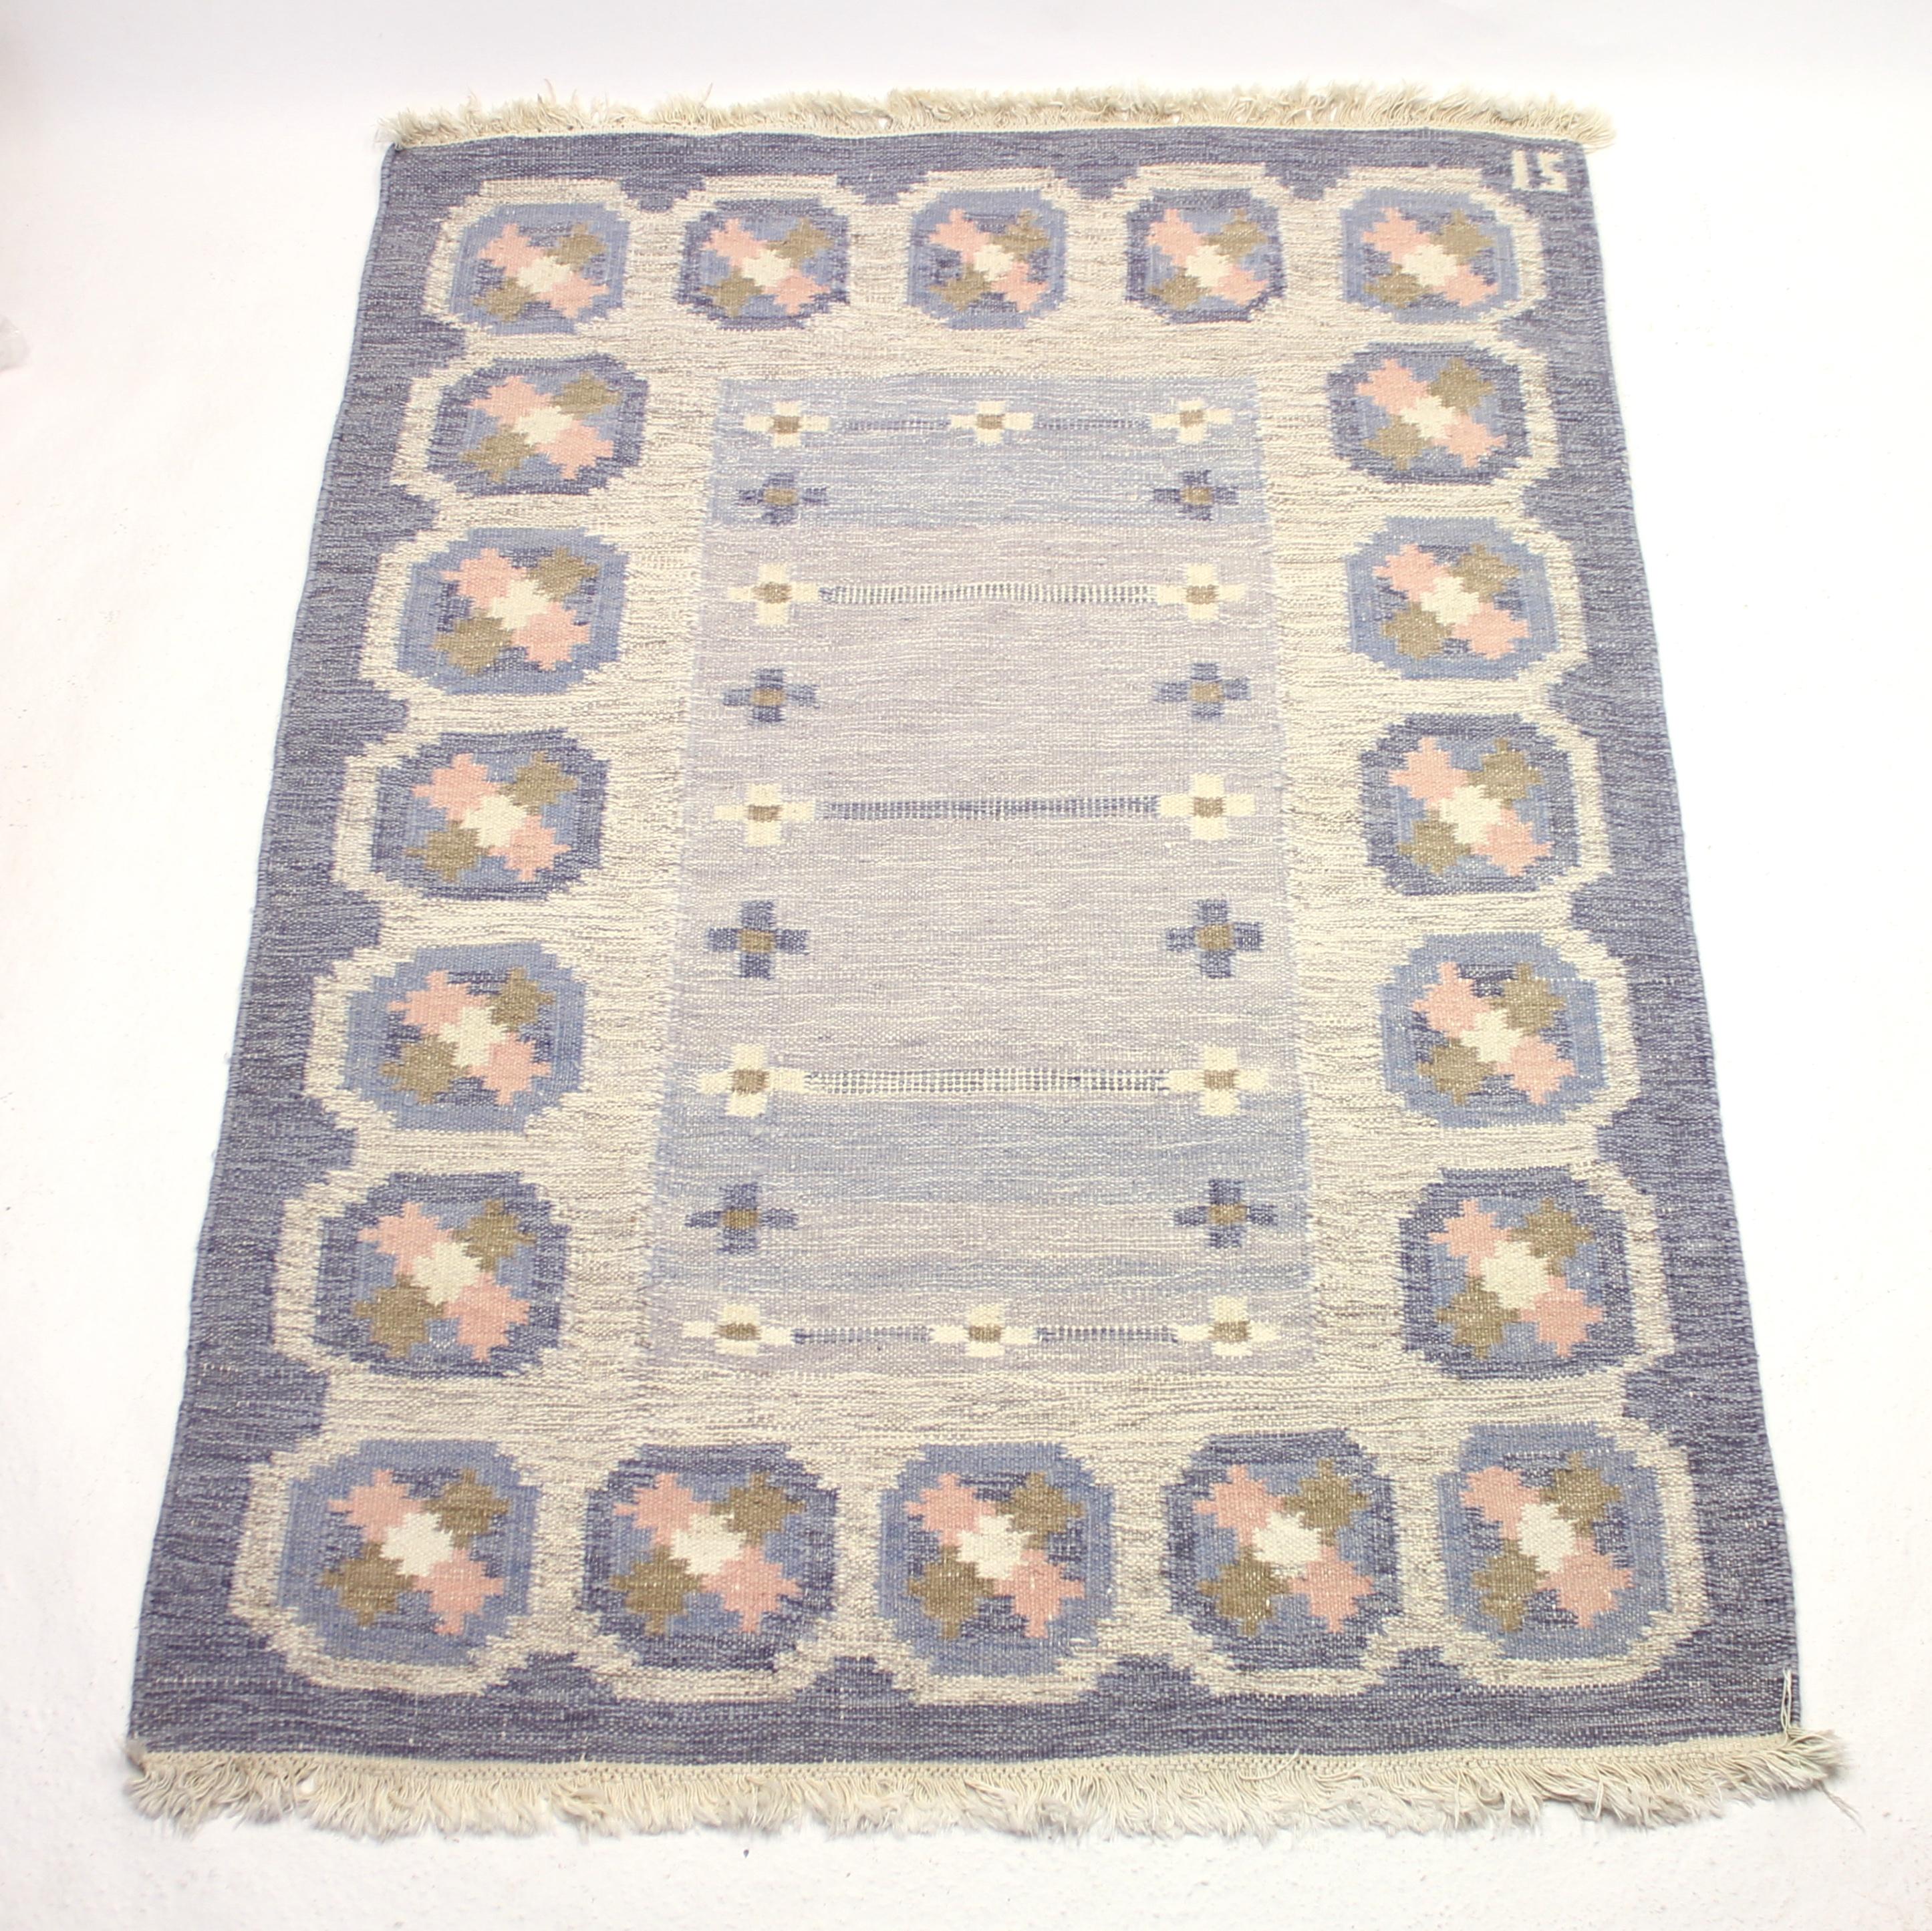 Swedish flat weave Röllakan carpet/rug from the 1950s by Ingegerd Silow. Signed IS in the upper right corner. Main colours are different hues of blue with a dose of grey, green, pink and white. The pattern consists of a blue frame and rectangular